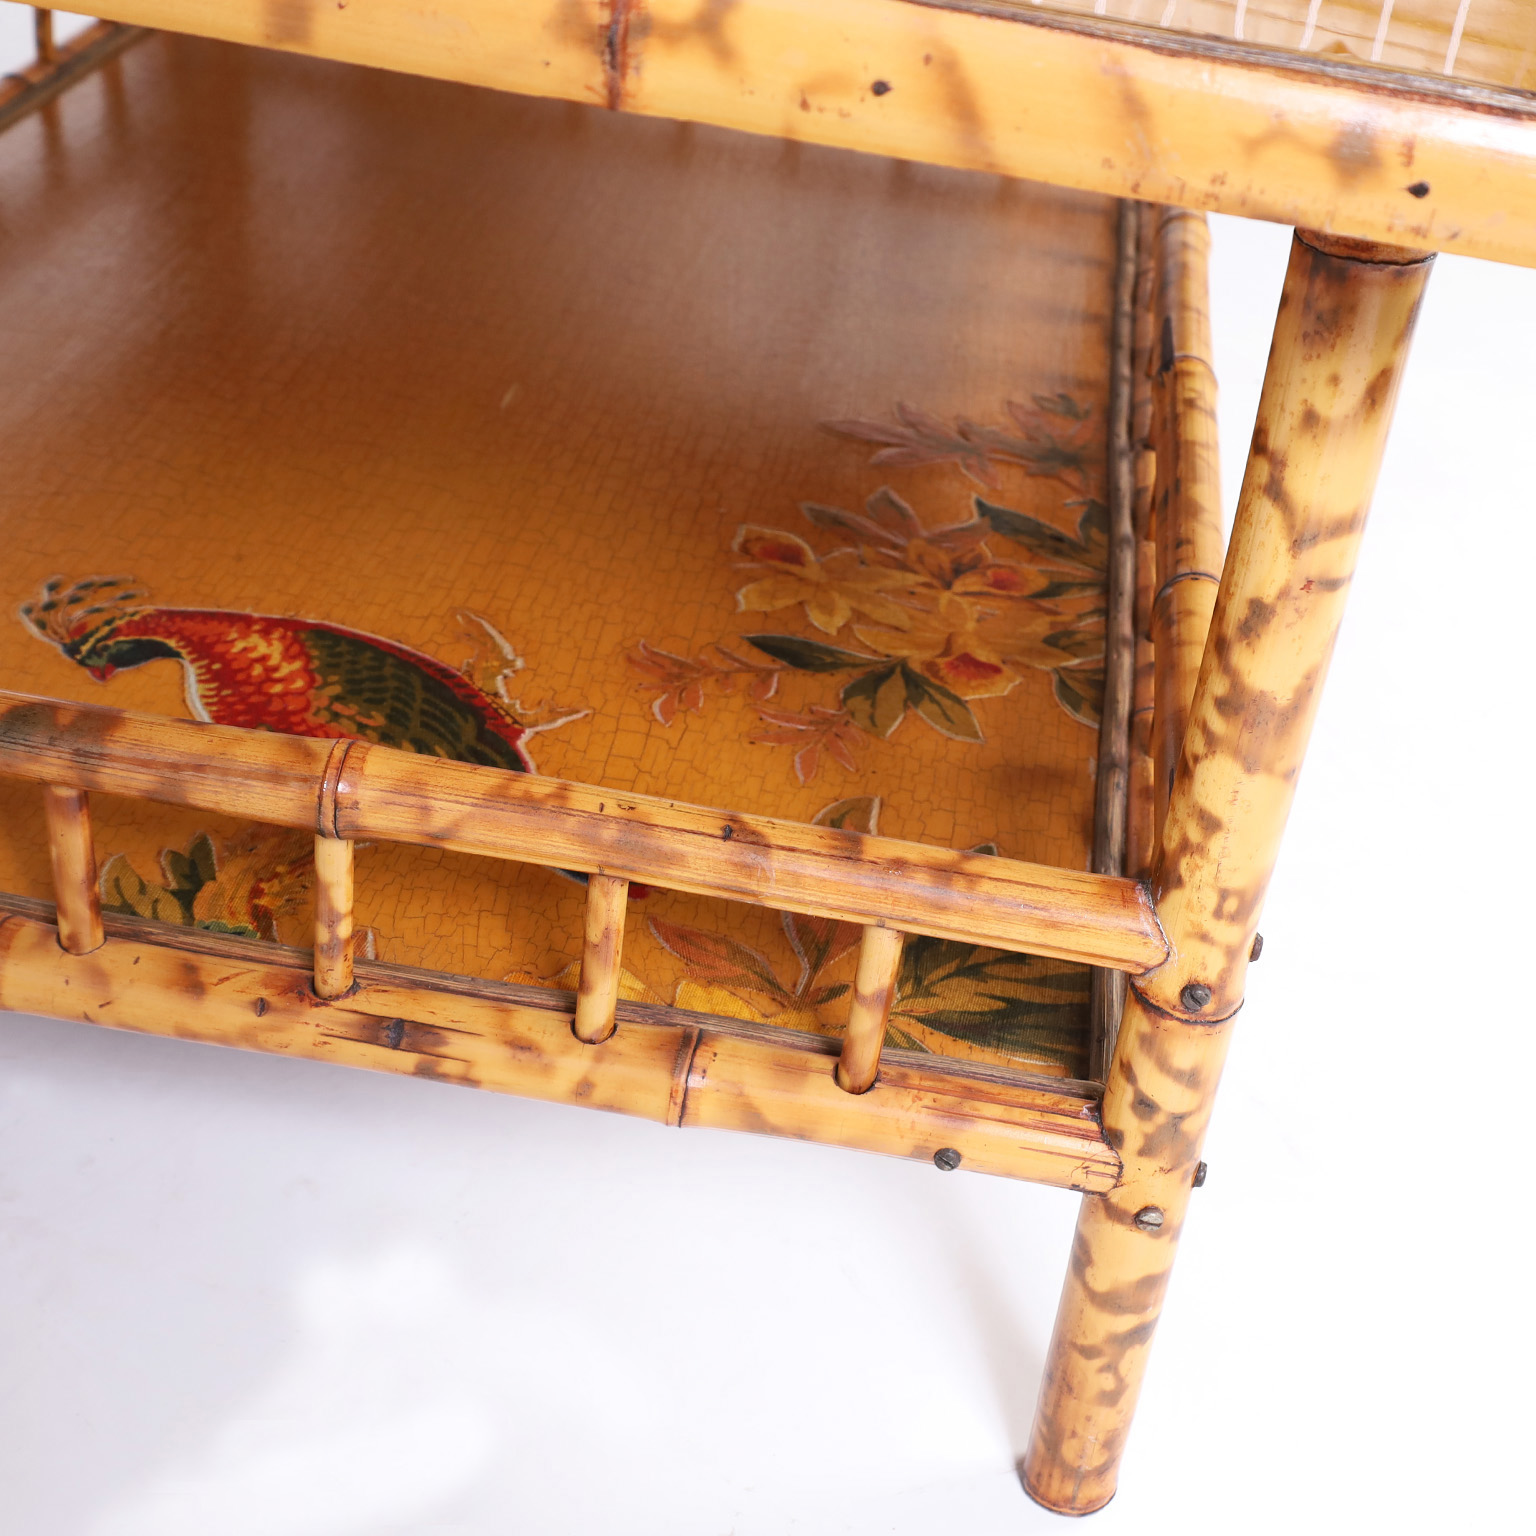 British Colonial Burnt Bamboo Coffee Table with a Decoupage Top